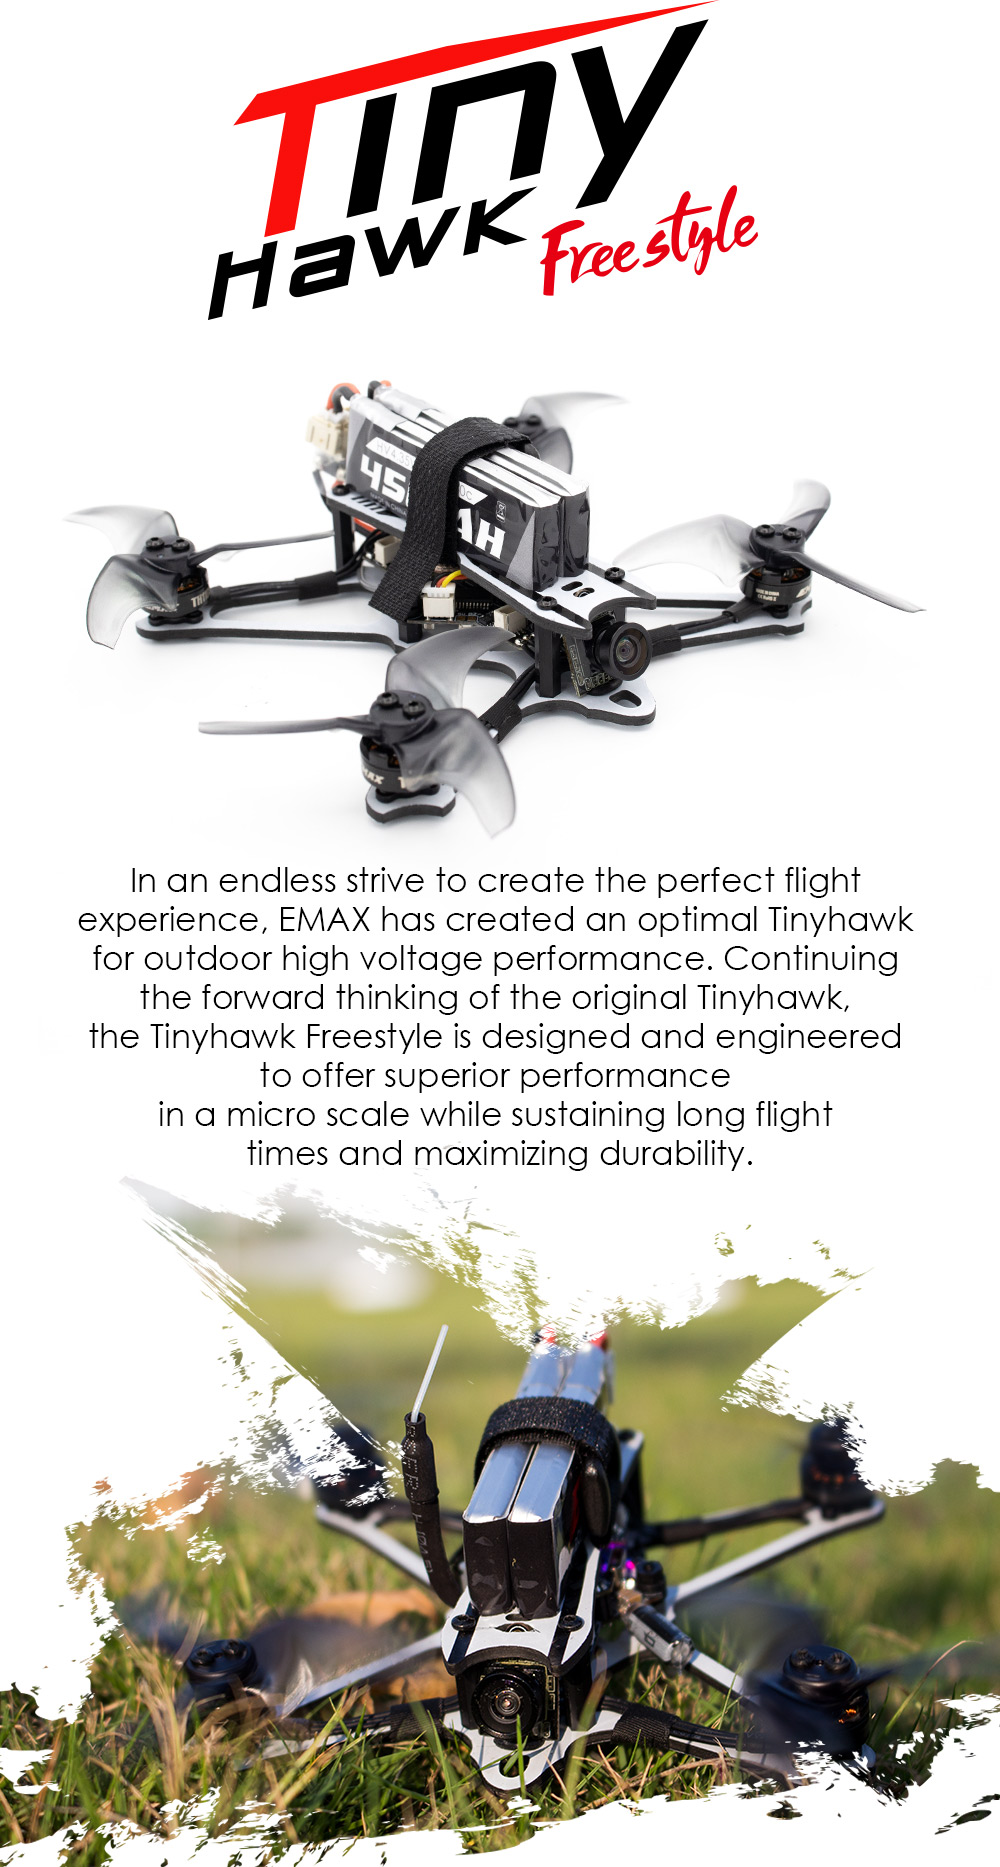 EMAX-Tinyhawk-Freestyle-115mm-25inch-F4-5A-ESC-FPV-Racing-RC-Drone-BNF-Version-1544254-1